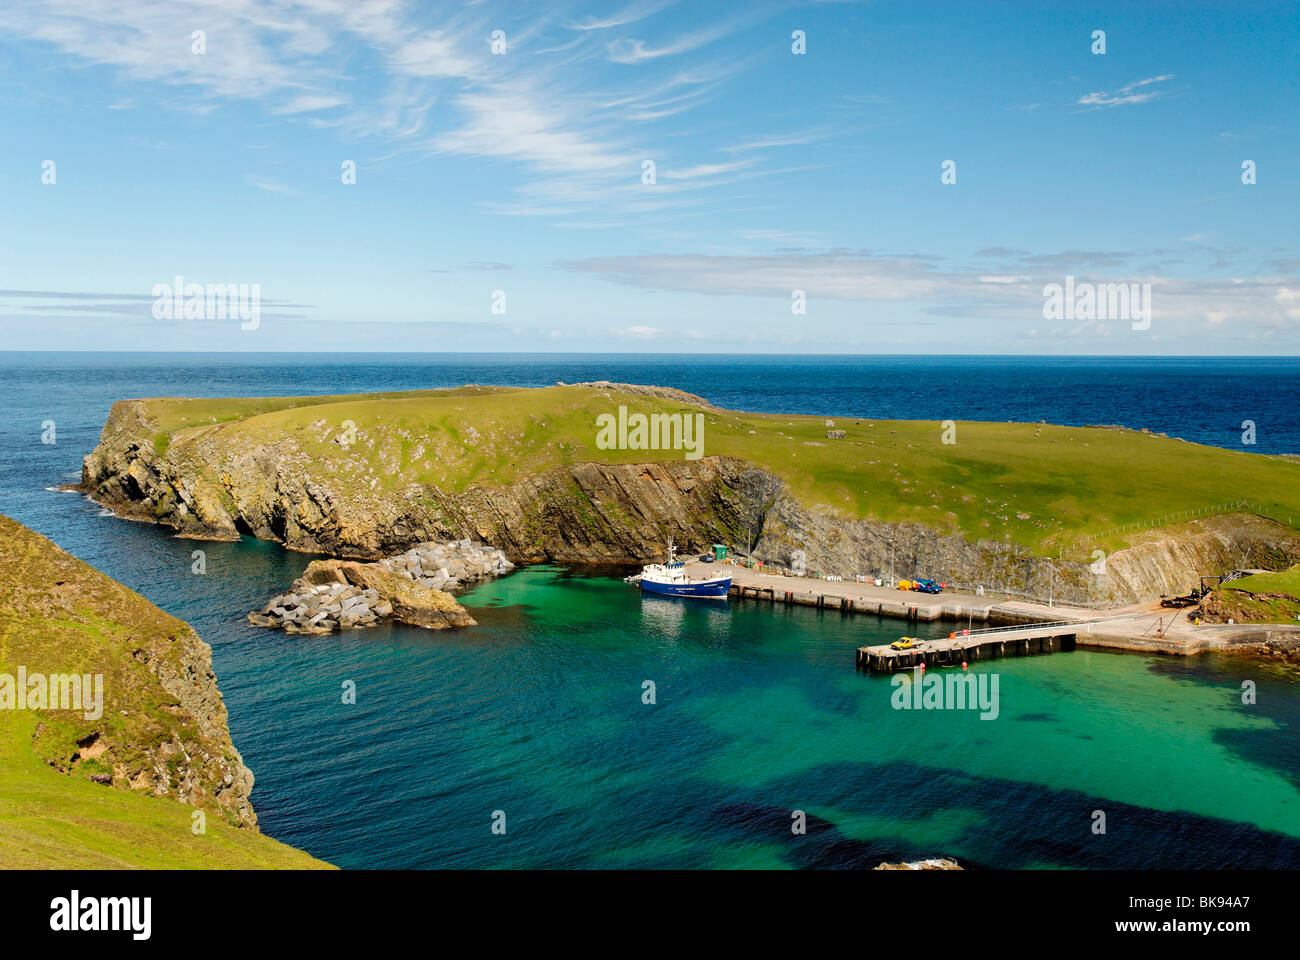 View of the North Haven with the 'Good Shepherd IV' ferry, Fair Isle, Shetland, Scotland, United Kingdom, Europe Stock Photo